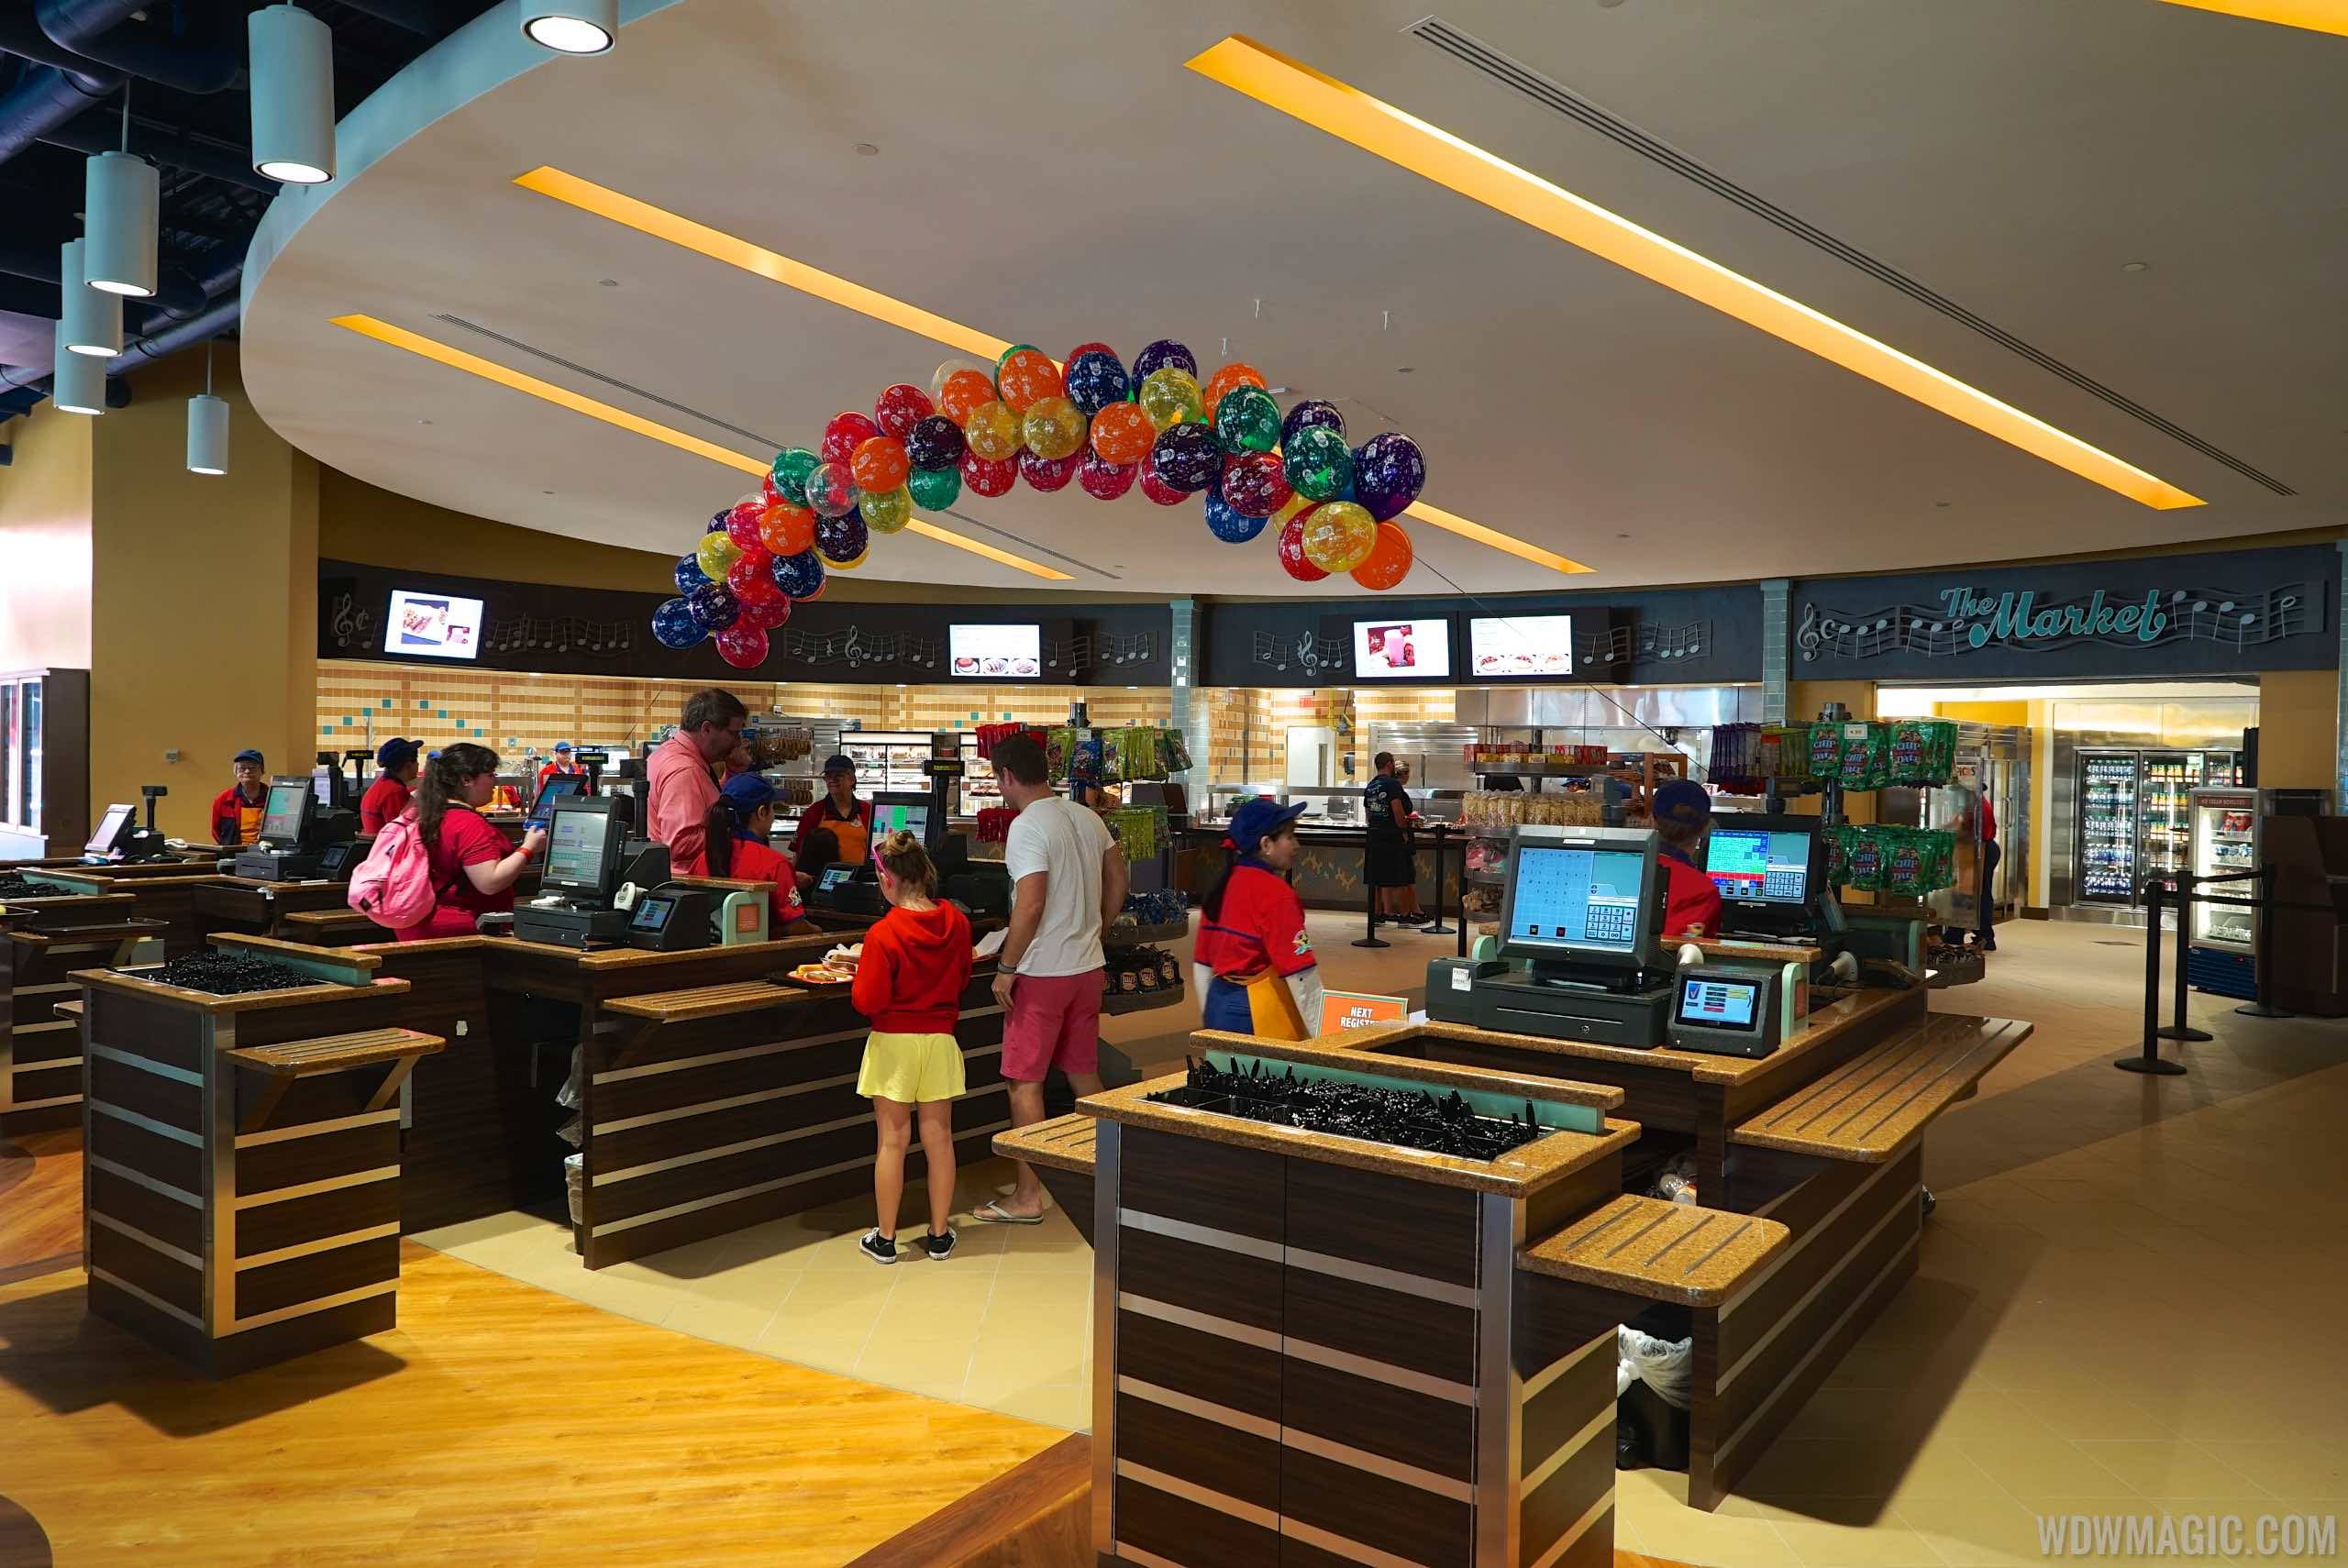 The new look Intermission Food Court